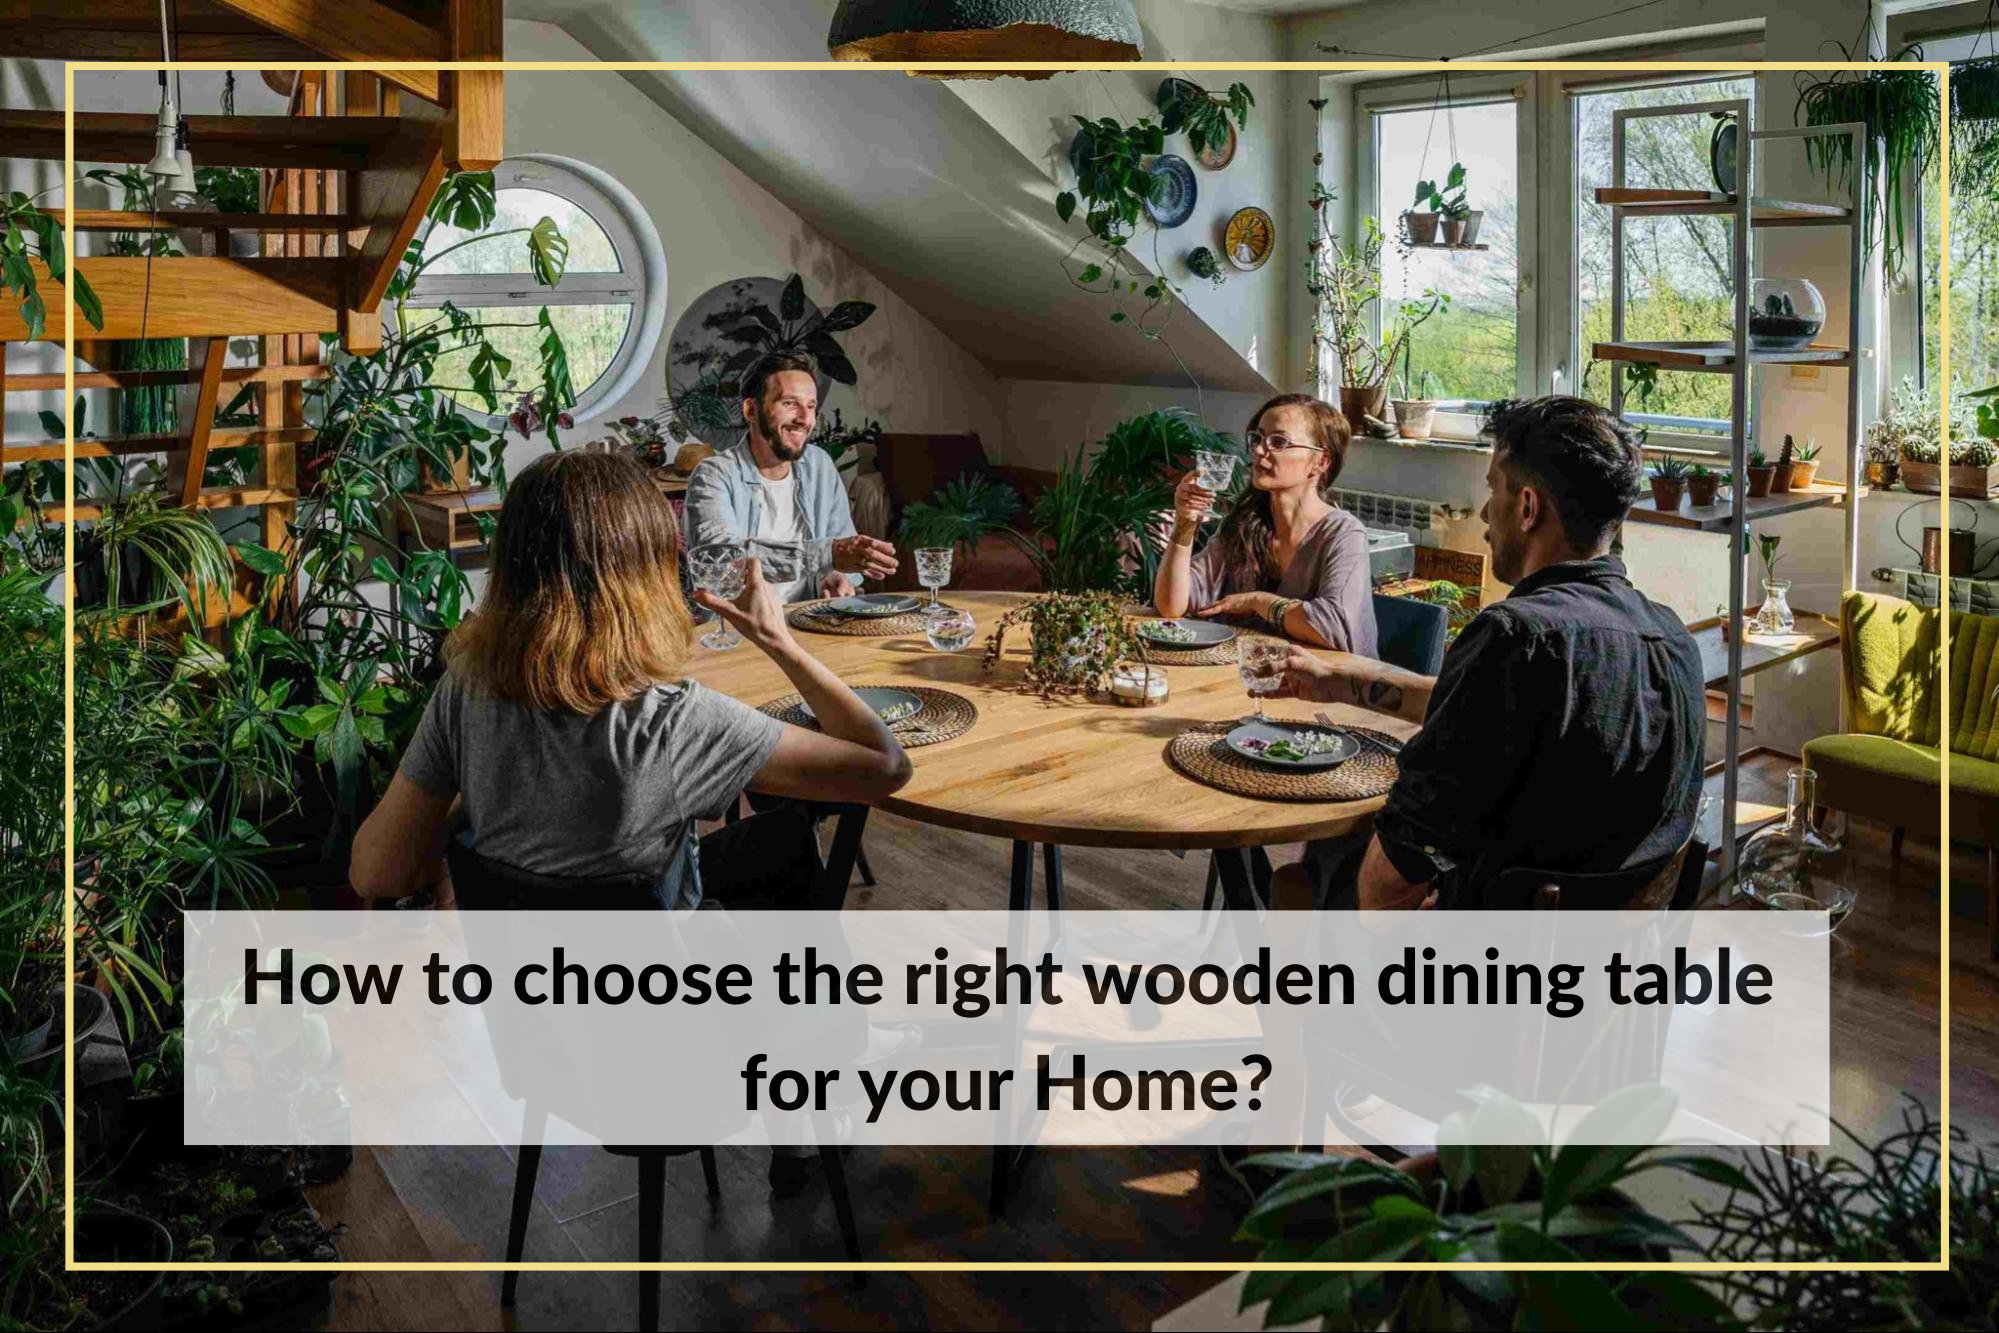 How to choose the right wooden dining table for your Home?